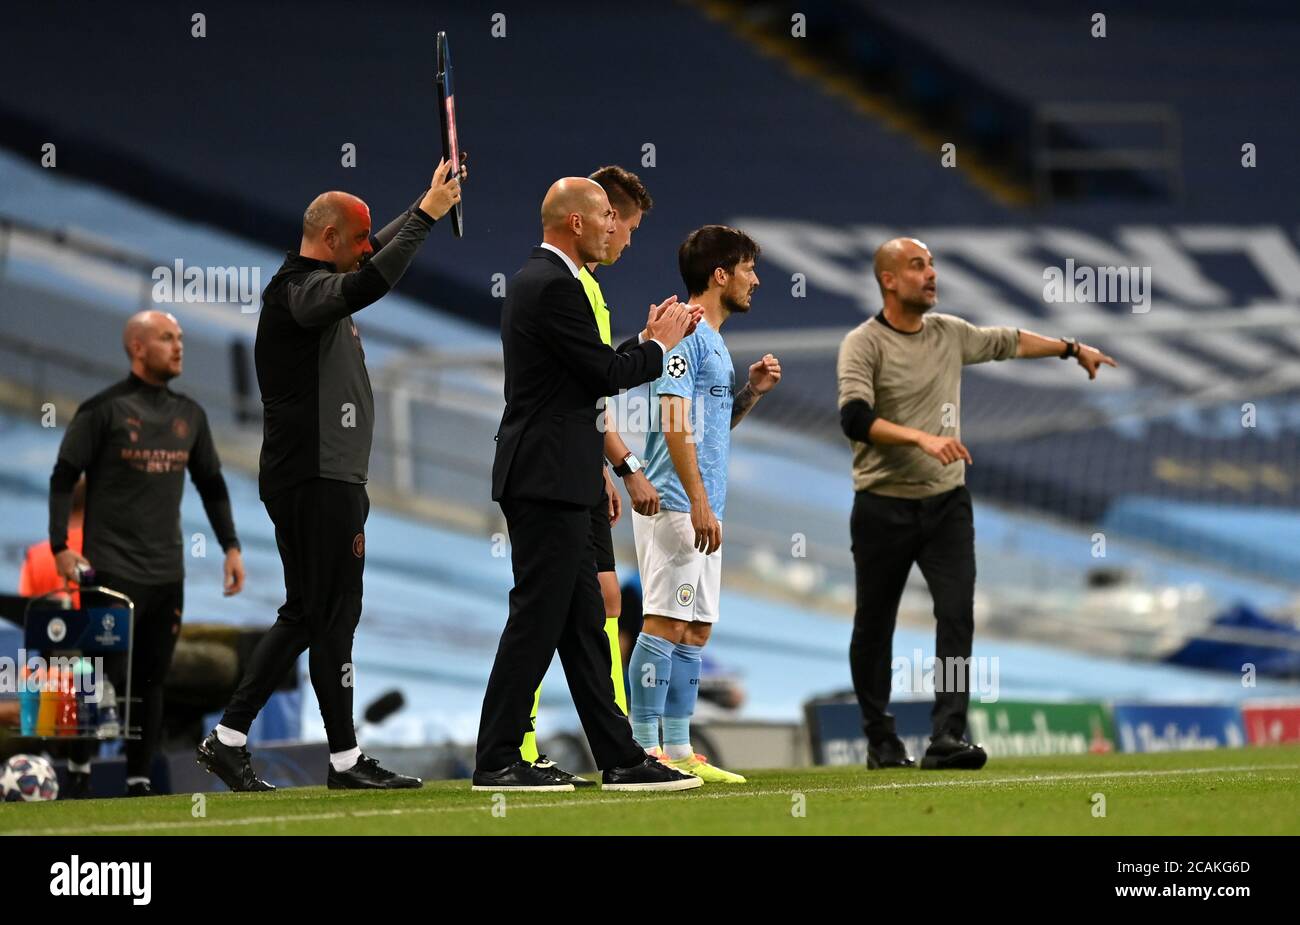 Manchester City's David Silva waits to come on as a substitute during the UEFA Champions League, round of 16, second leg match at the Etihad Stadium, Manchester. Friday August 7, 2020. See PA story soccer Man City. Photo credit should read: Shaun Botterill/NMC Pool/PA Wire. RESTRICTIONS: Editorial Use Only, No Commercial Use Stock Photo